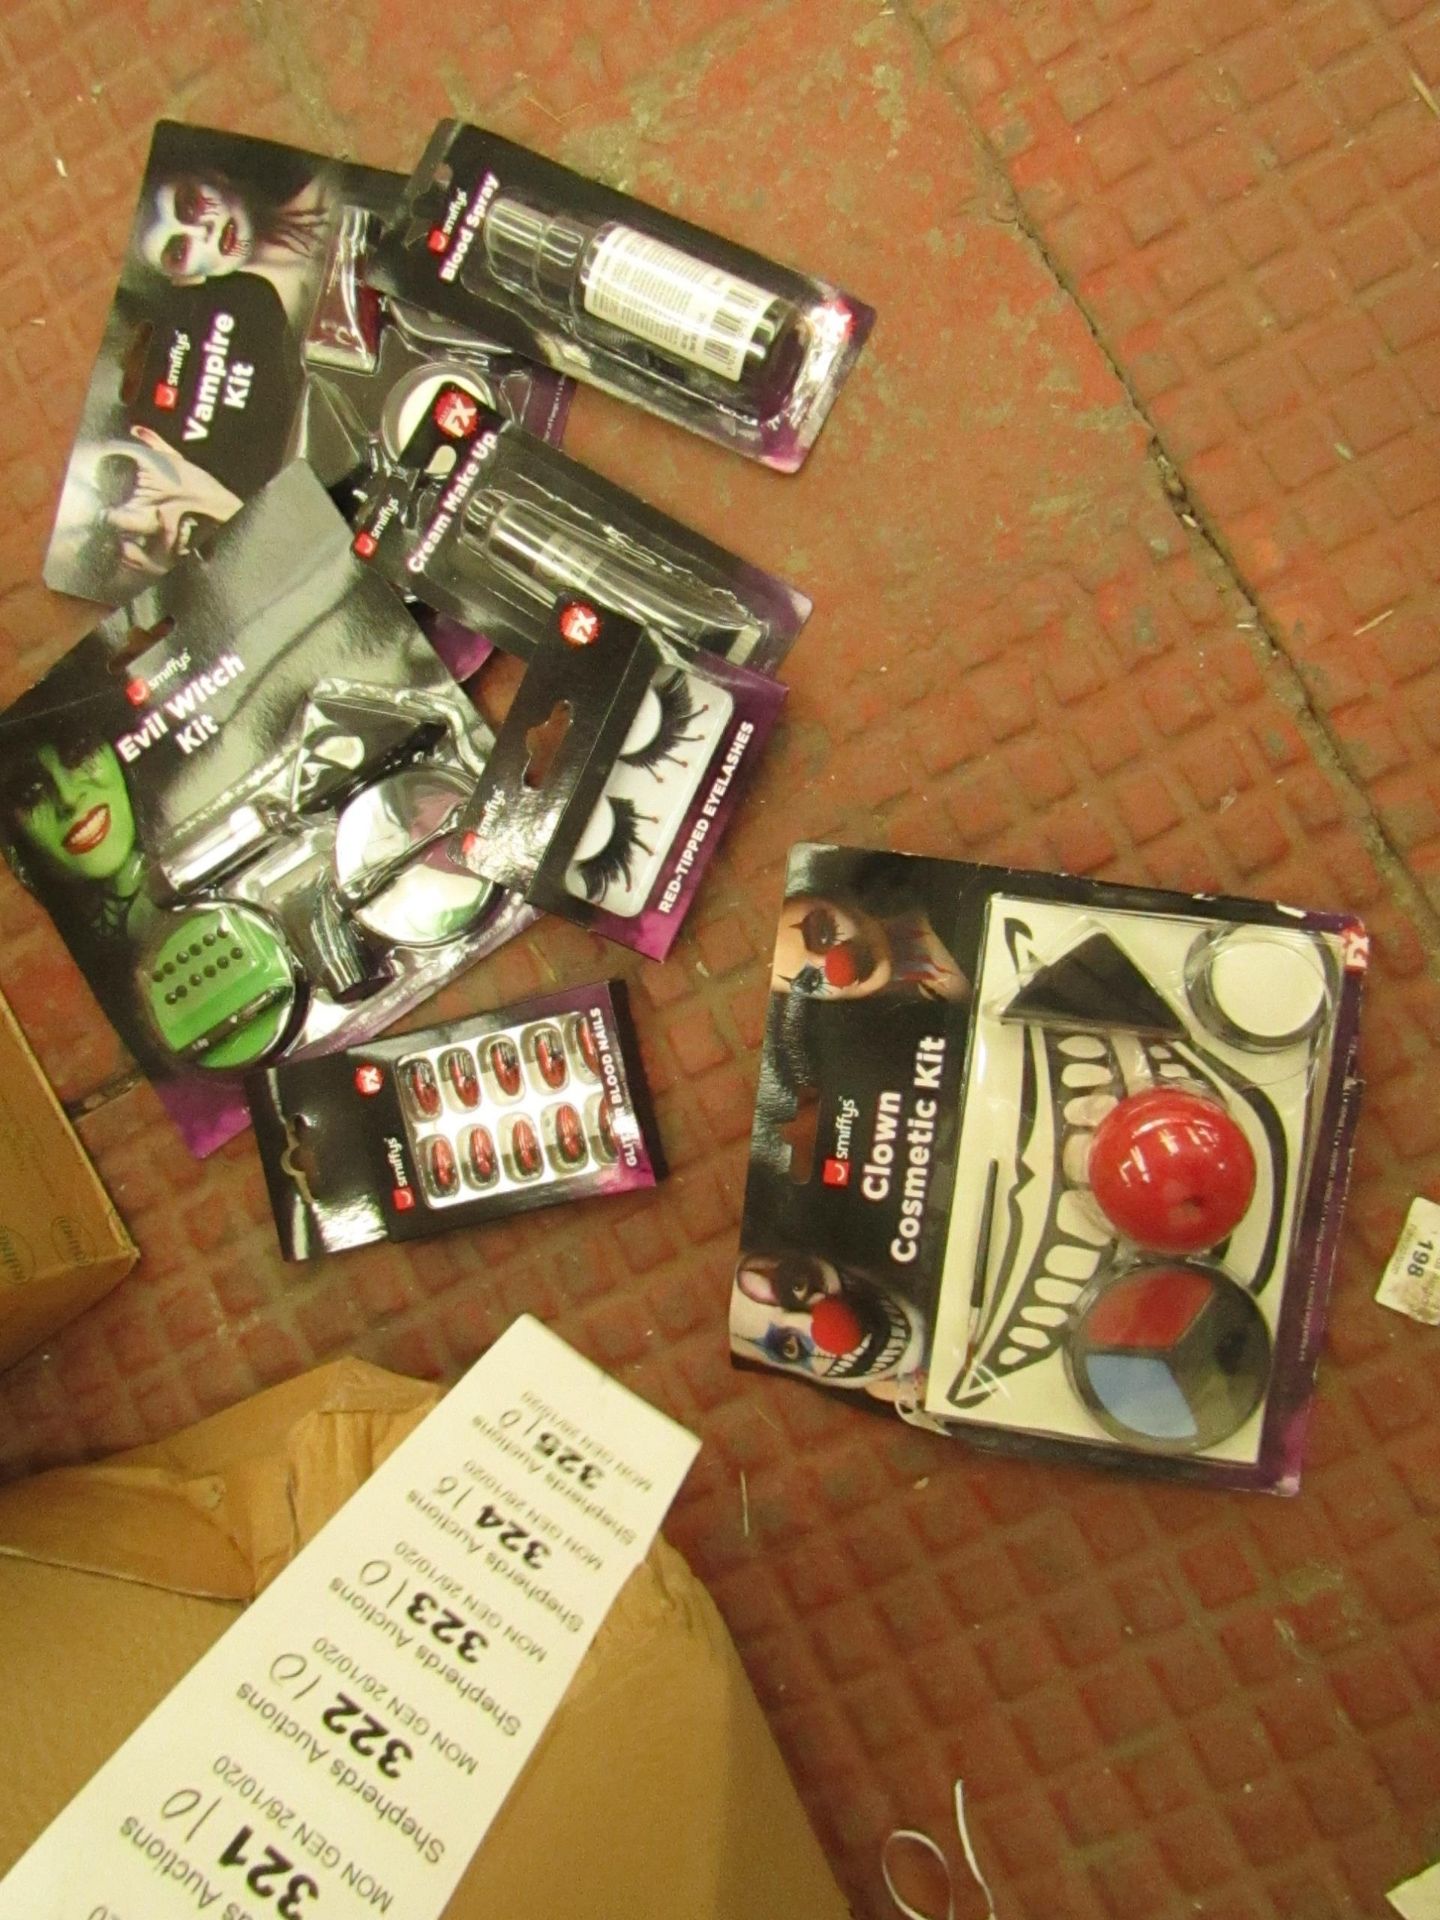 10 x Halloween make up Items incl Paints, Nails,Blood etc. Picked at Random